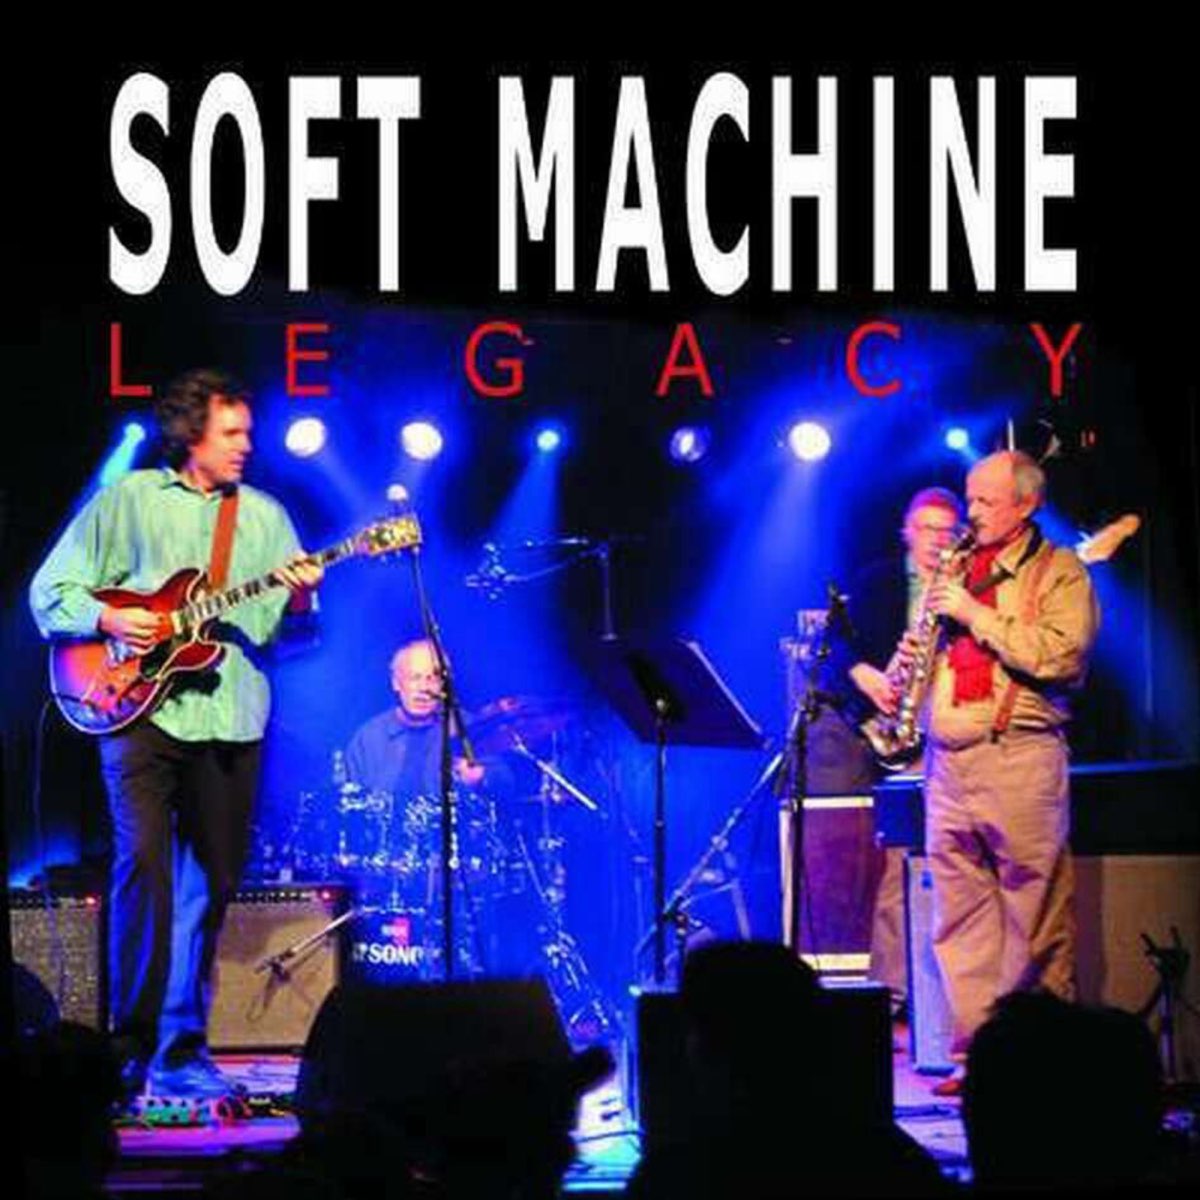 Live At the New Morning - Album by Soft Machine Legacy - Apple Music